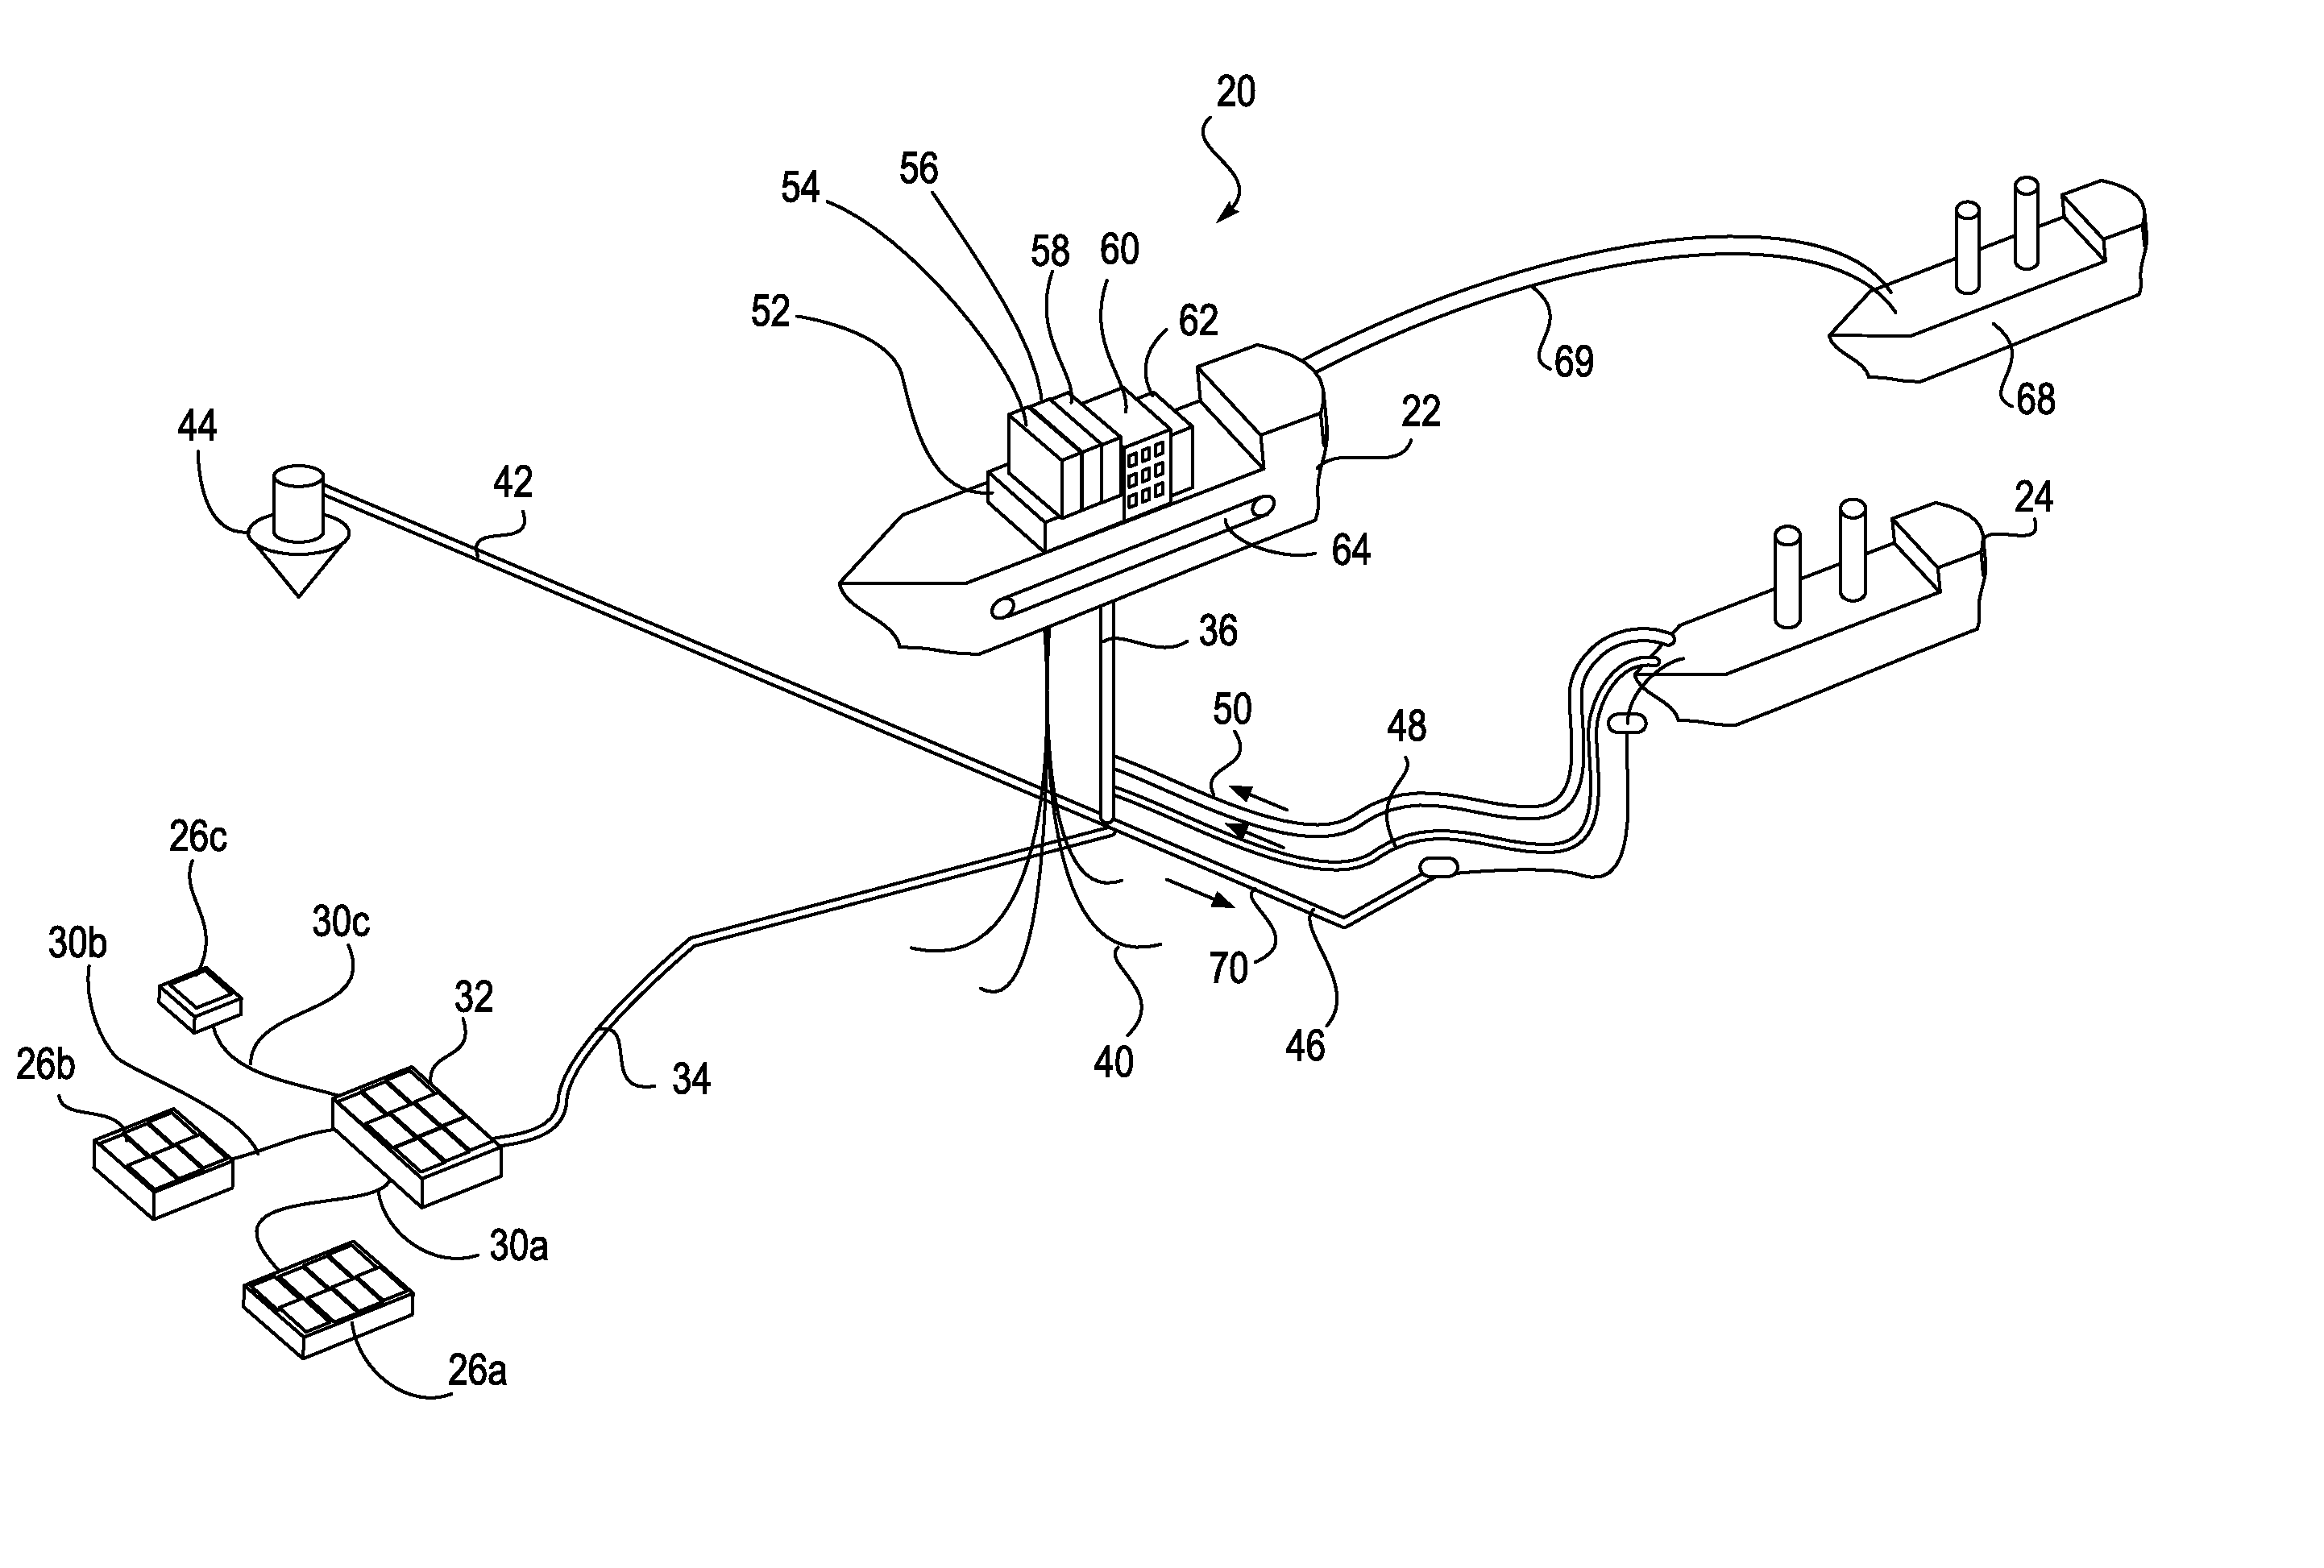 METHOD, SYSTEM, AND PRODUCTION AND STORAGE FACILITY FOR OFFSHORE LPG and LNG PROCESSING OF ASSOCIATED GASES